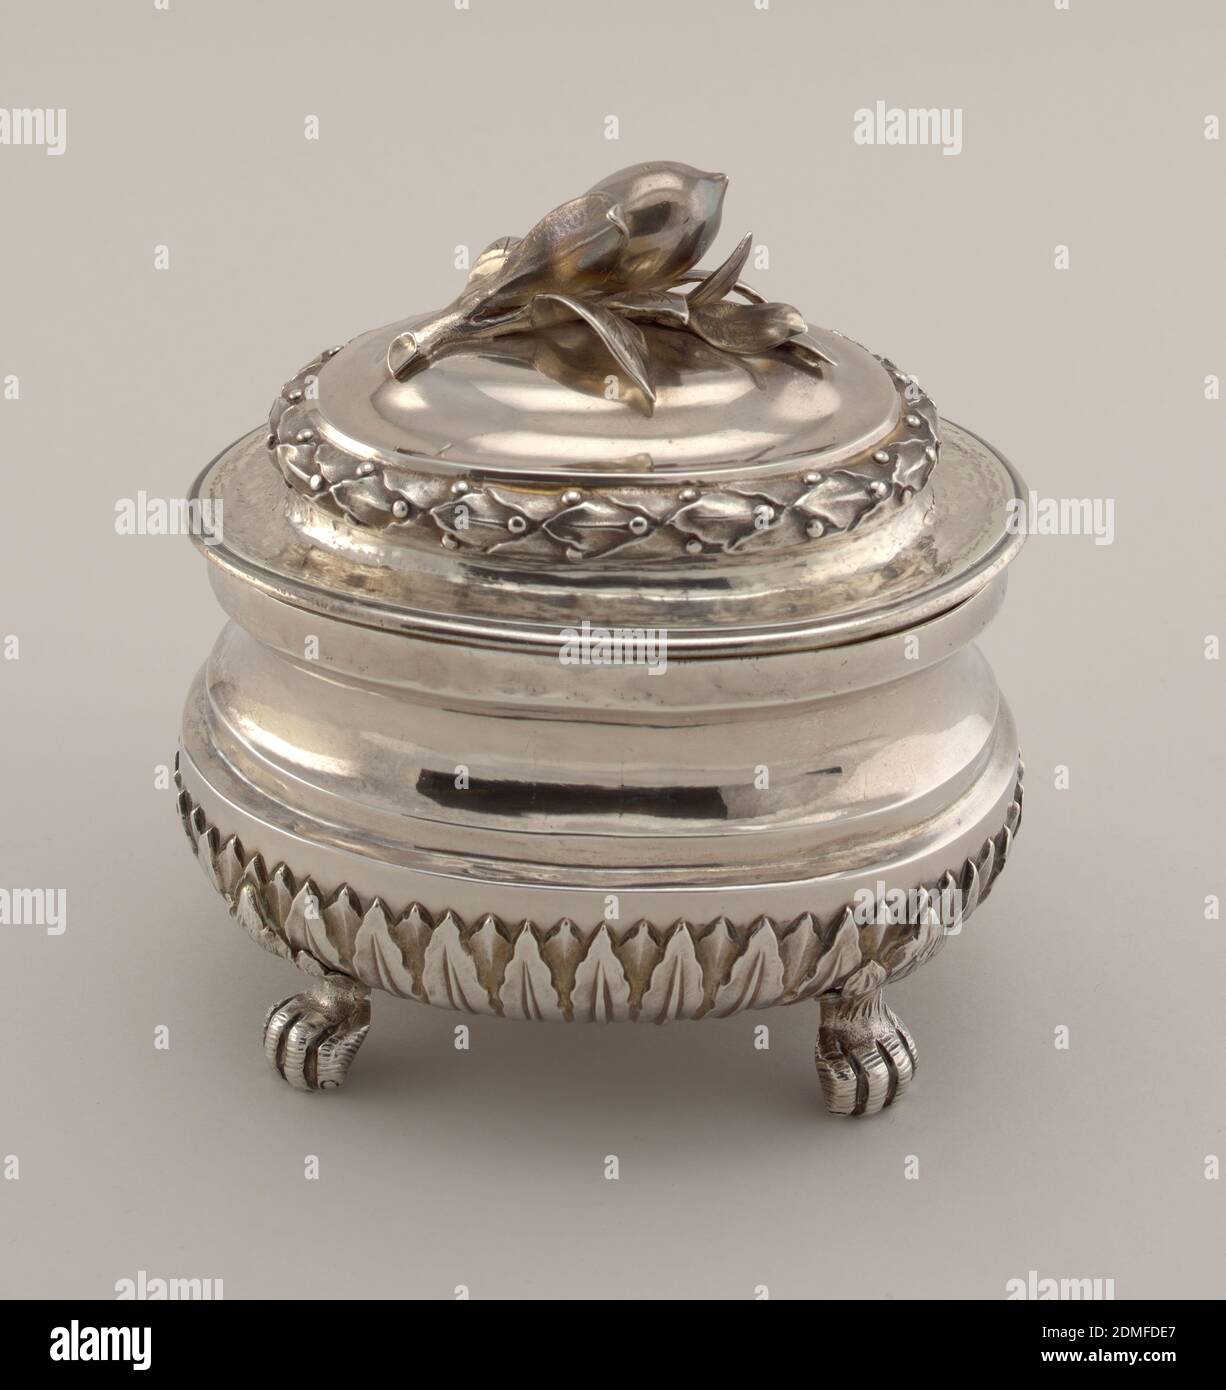 Sugar Bowl with Lemon Finial, silver, repousse, Bowl has lancet leaves on lower half, on four animal feet. Domed cover with repousse laurel wreath and lemon finial., Italy, ca. 1768, metalwork, Decorative Arts, sugar bowl, sugar bowl Stock Photo